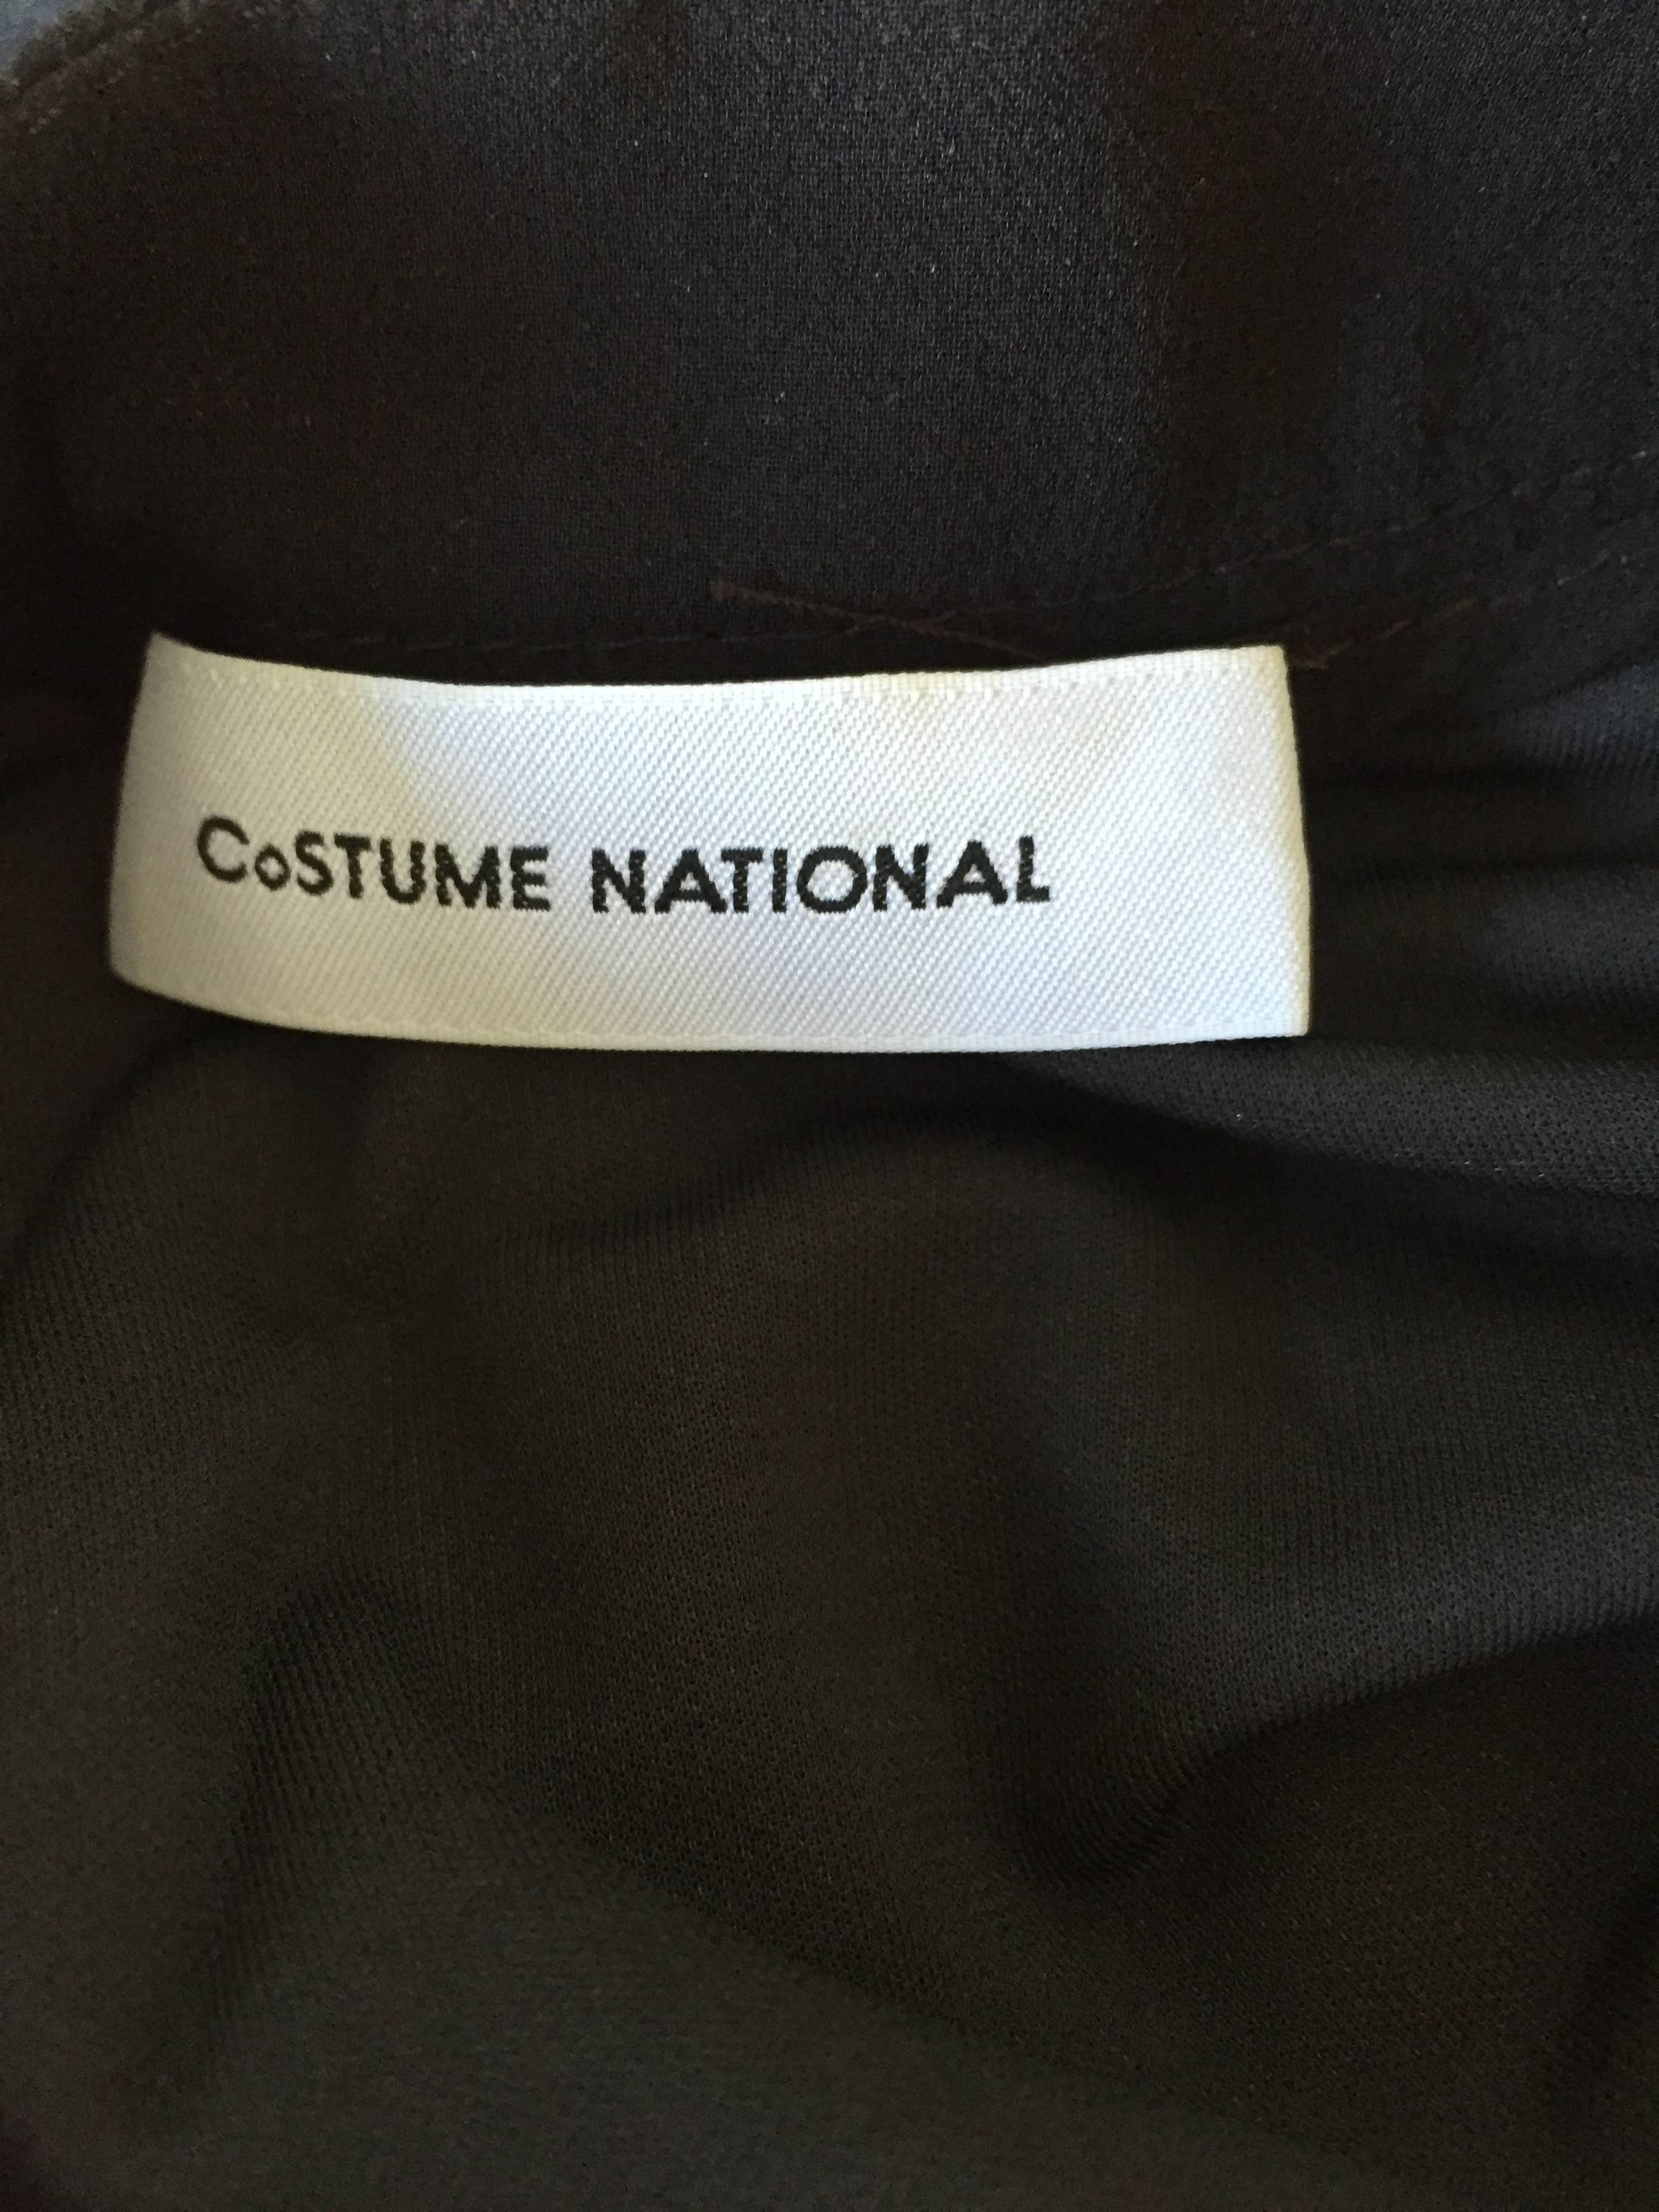 Vintage Costume National 1990s Grey Jersey Sexy Belted 90s Bodycon Dress Sz 38 For Sale 2